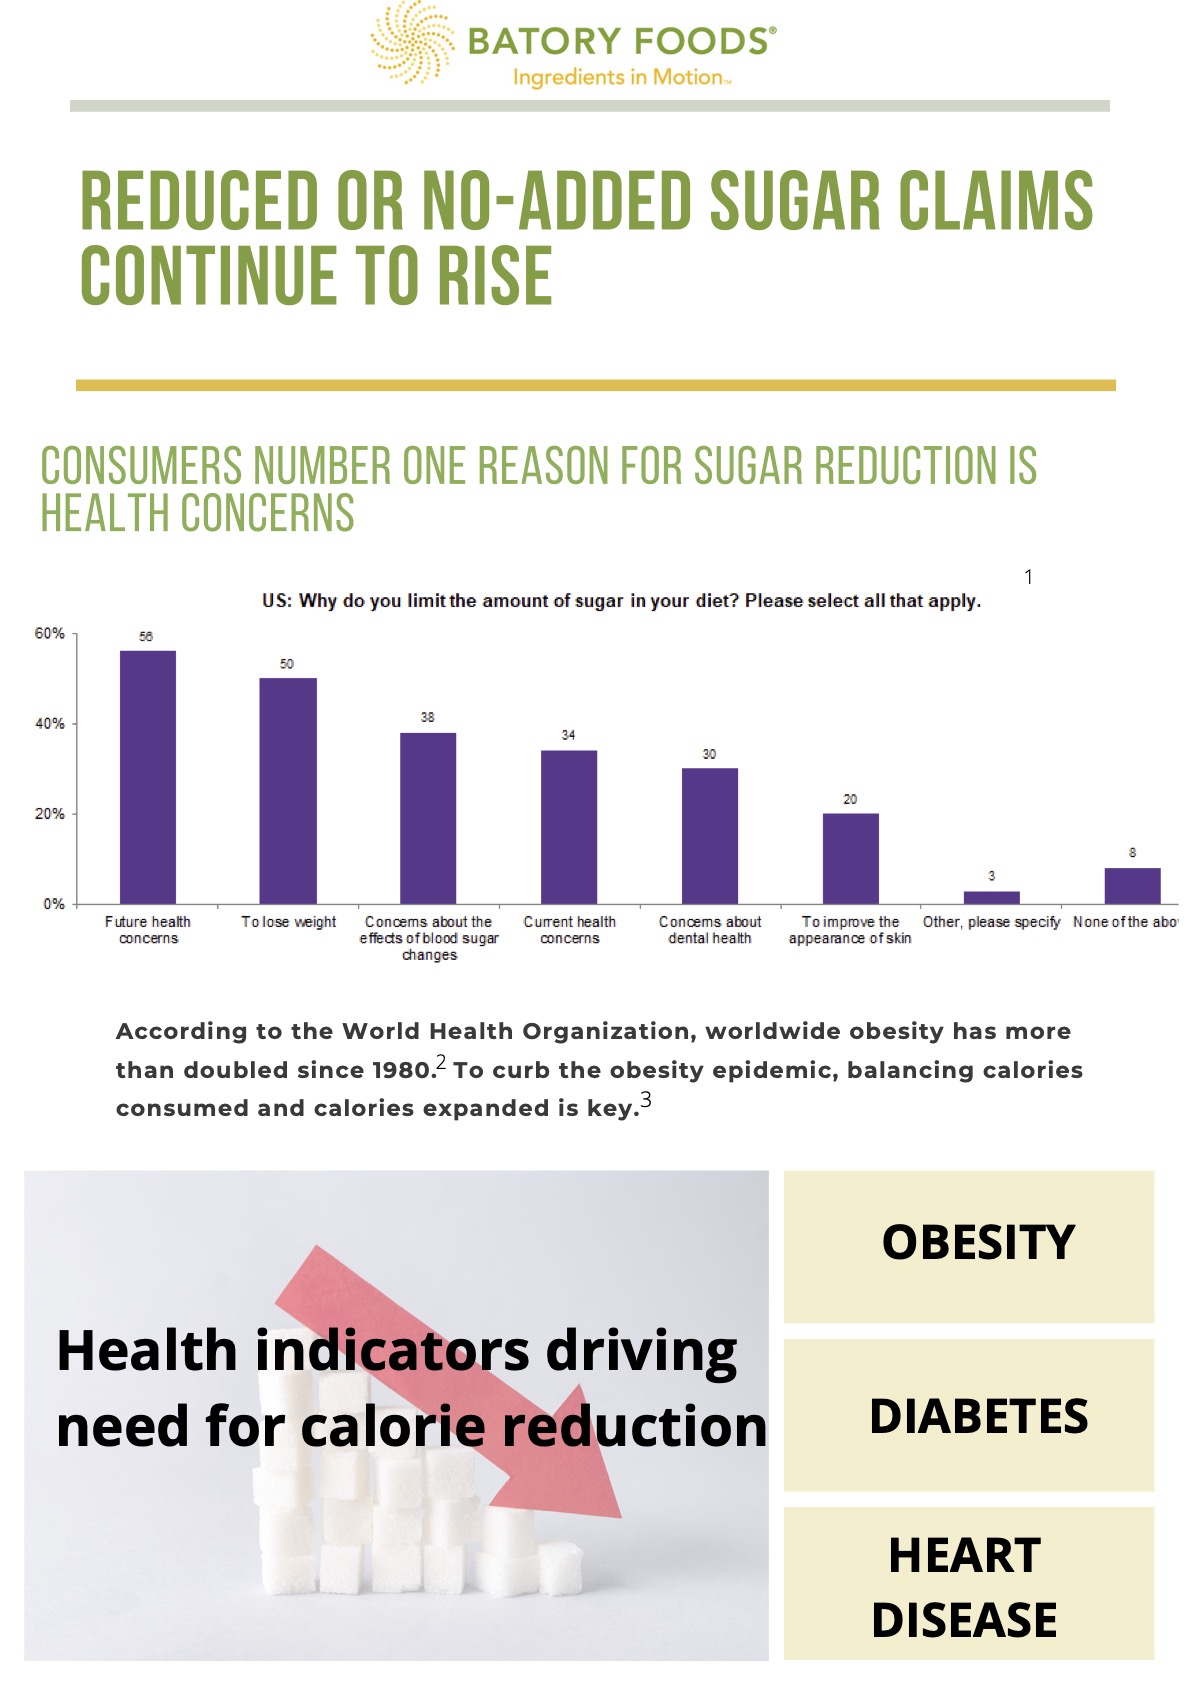 Reduced or No-Added Sugar Claims Continue to Rise